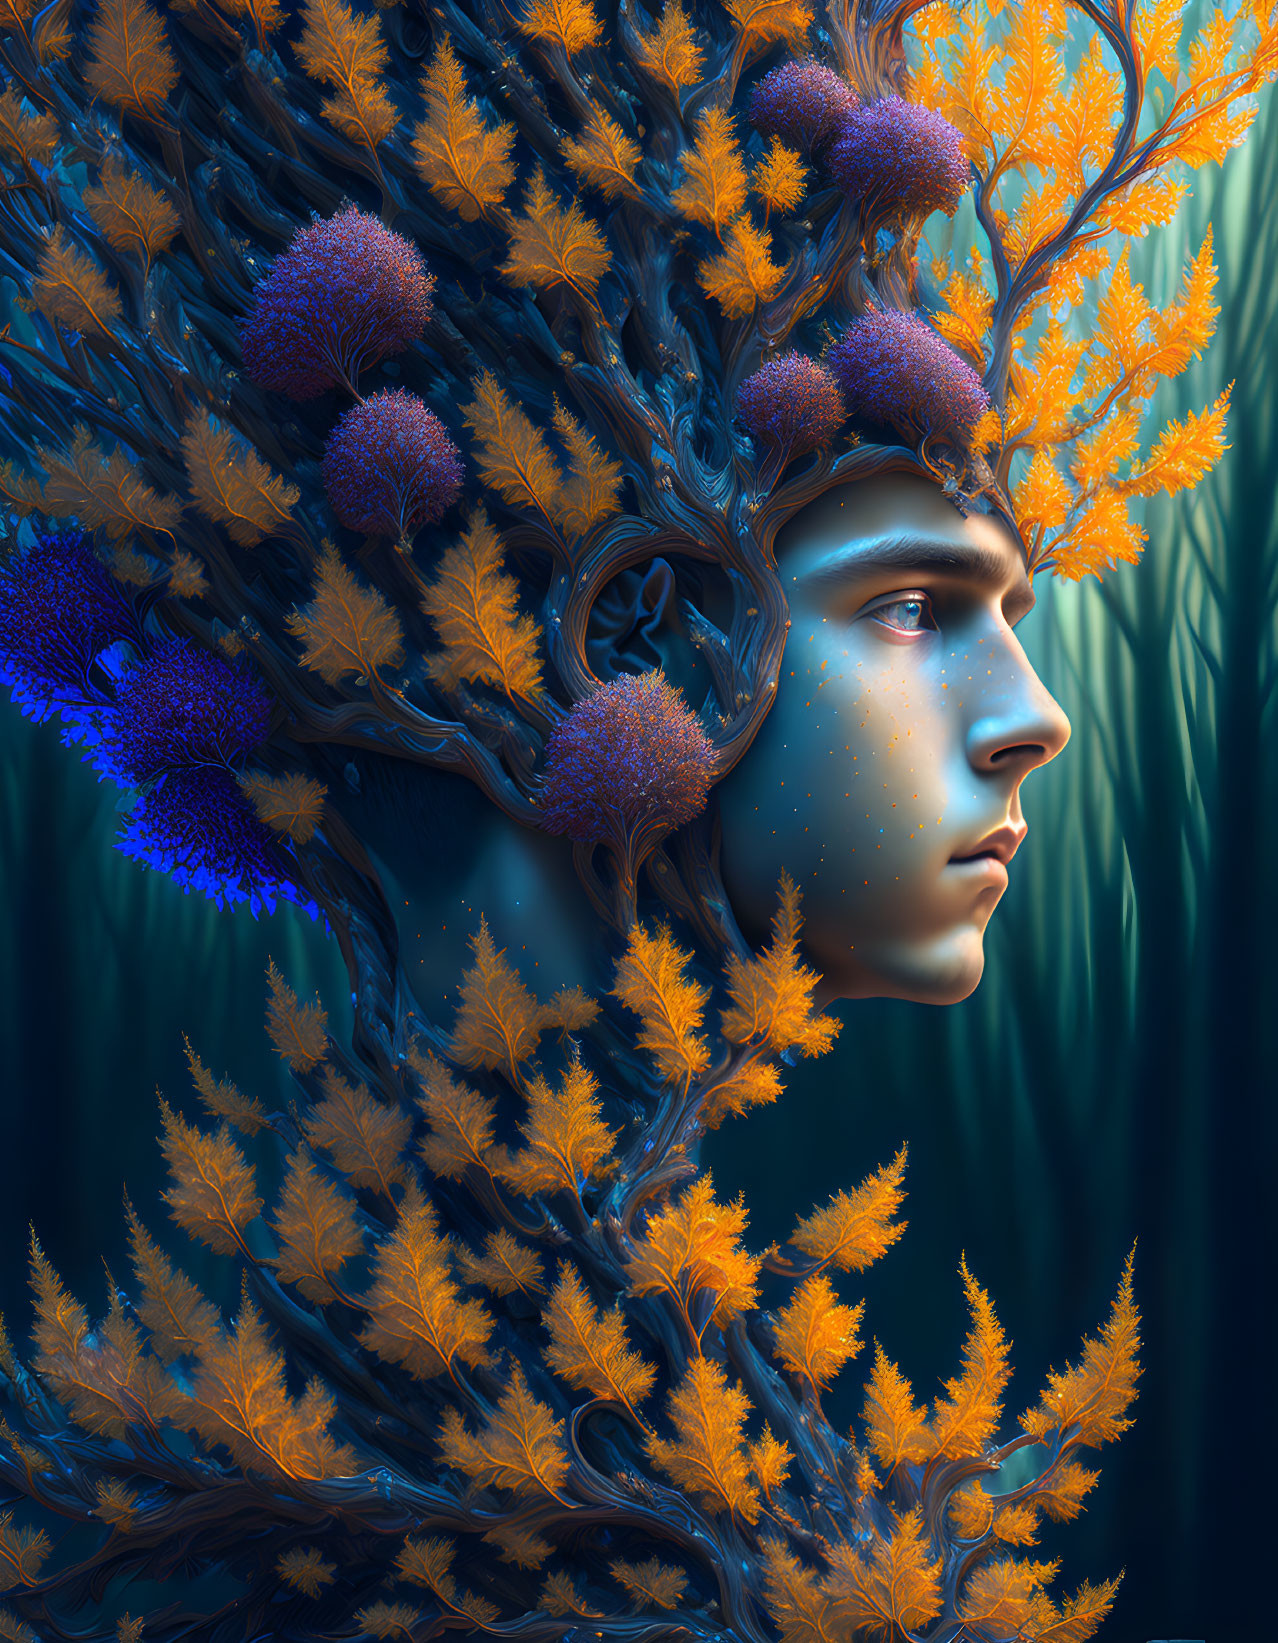 Blue-skinned person with tree head in orange and purple foliage on dark teal background